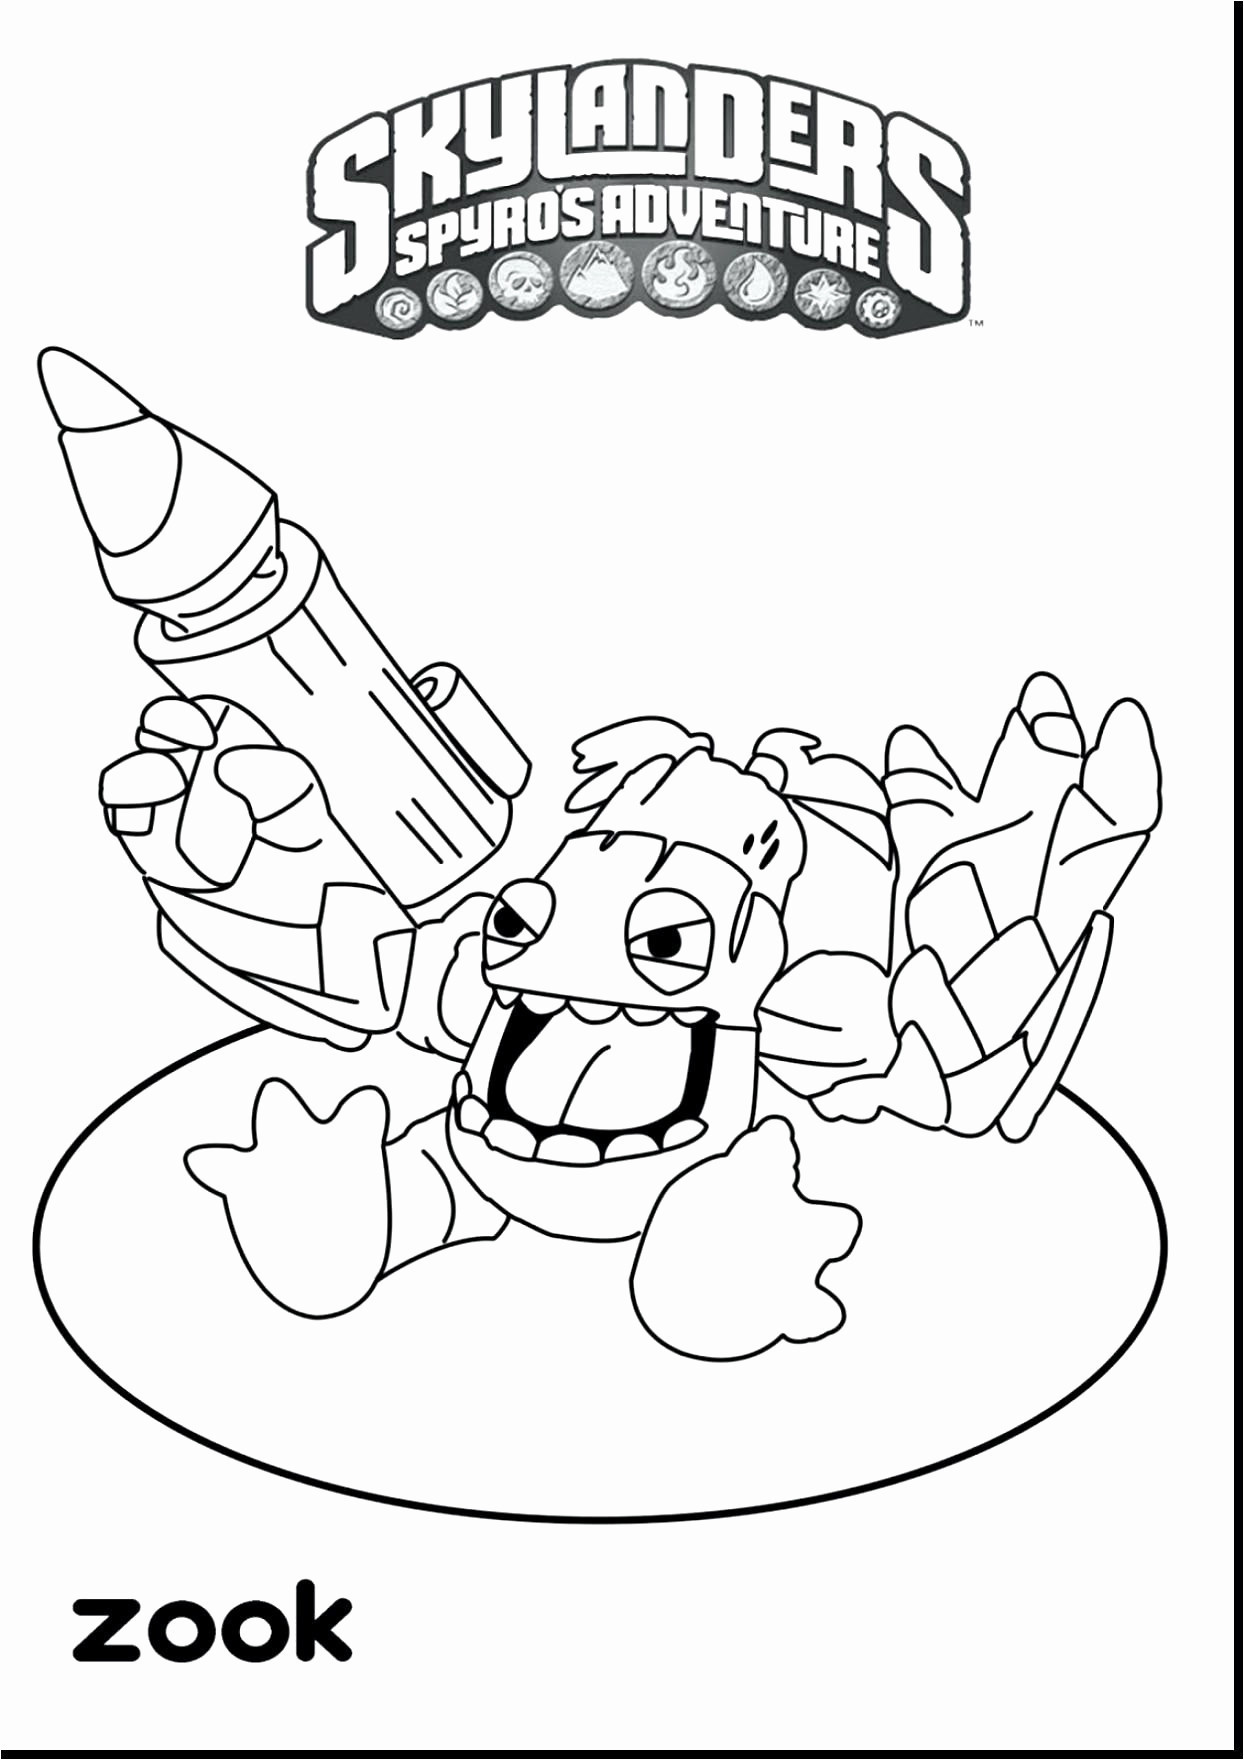 15 Unique Blue Vase Books 2024 free download blue vase books of vases flower vase coloring page pages flowers in a top i 0d and with regard to autumn coloring pages new preschool coloring pages fresh fallhigh quality coloring books